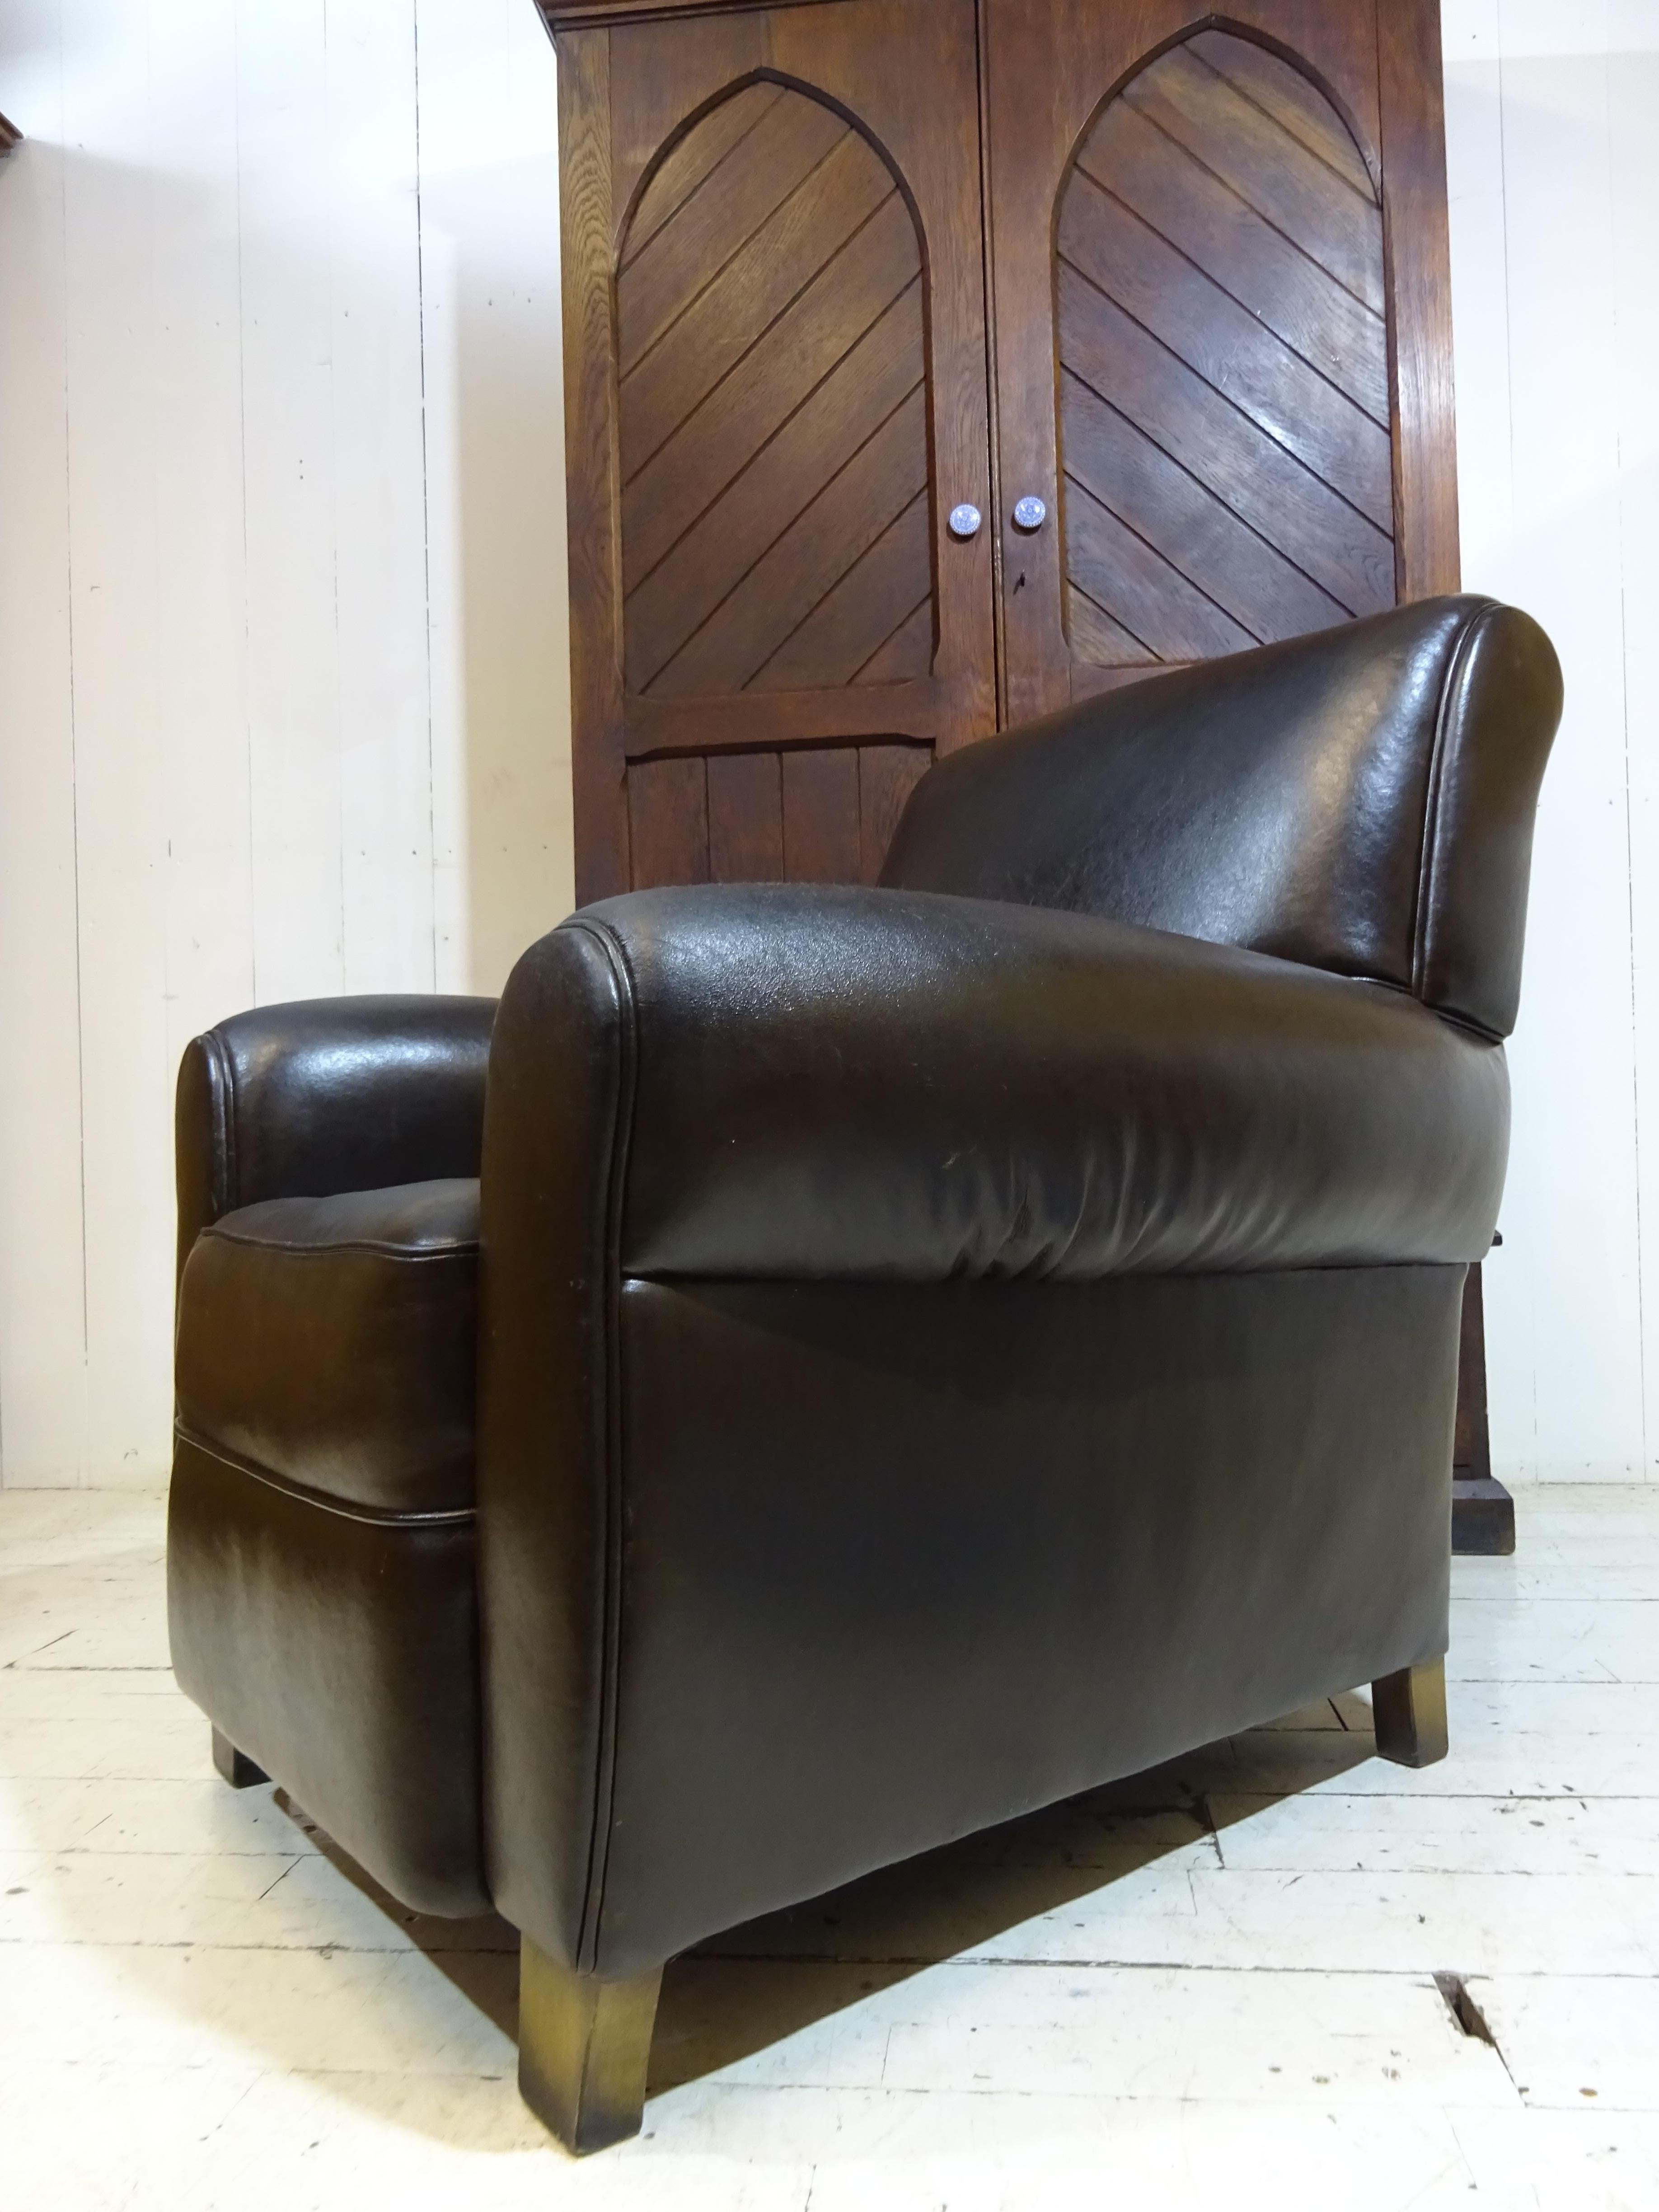 In the same family since new this is a quality leather armchair by renouned chair maker Tetrad. Dated circa mid 1990s the chair is extremely well made with a solid beech frame offering a comfortable and supportive seating position.

The chair has